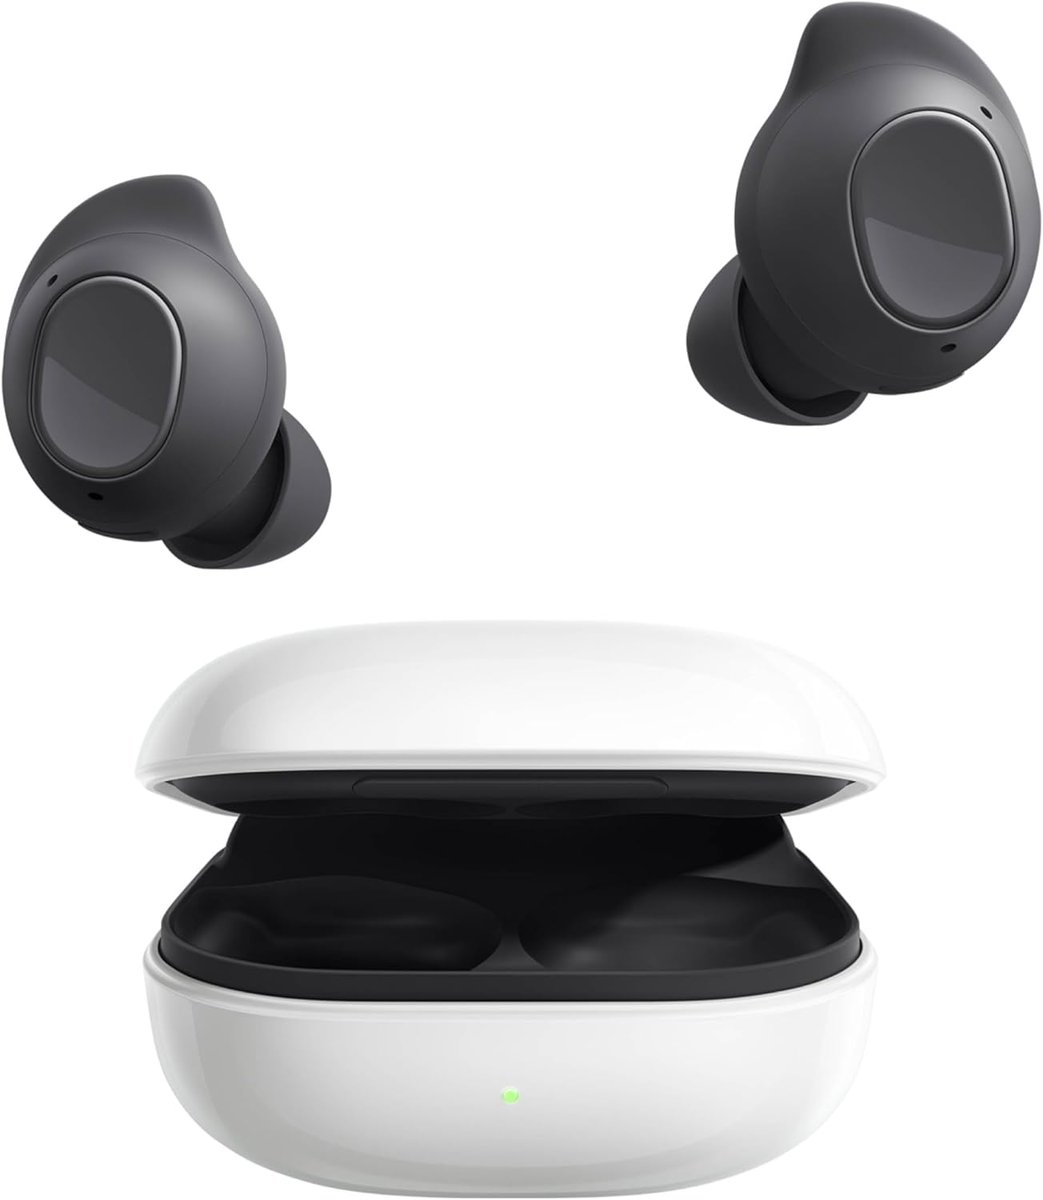 🎧 BlueDeals Alert! 🎧

Experience true wireless freedom with the SAMSUNG Galaxy Buds FE!
- ✅ Deal Price: $69.99
- ❌ Original Price: $99.99
- Act fast: amzn.to/3GRYdrA

#BlueDeals #AmazonDeals #AudioEssentials #DealAlert 🎶🌟